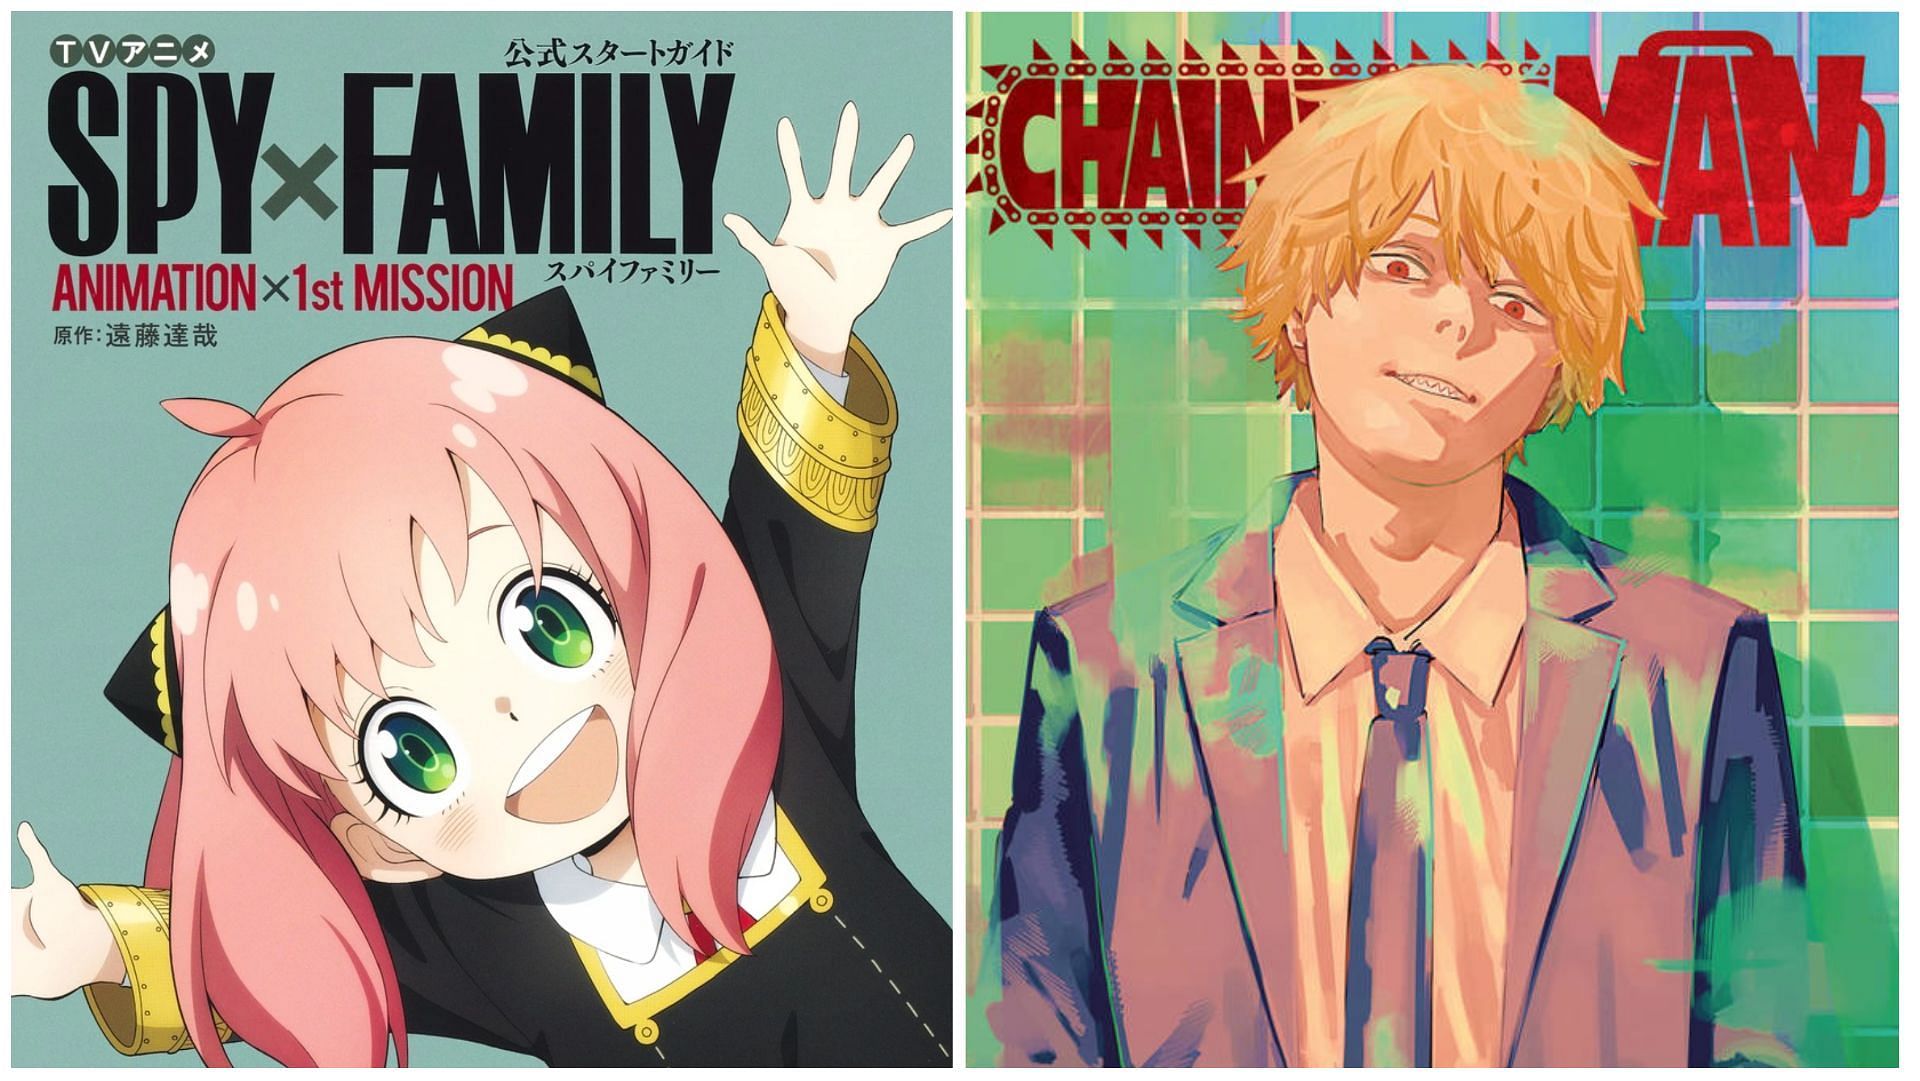 New Crunchyroll 'Free' Anime Includes Chainsaw Man and Spy x Family